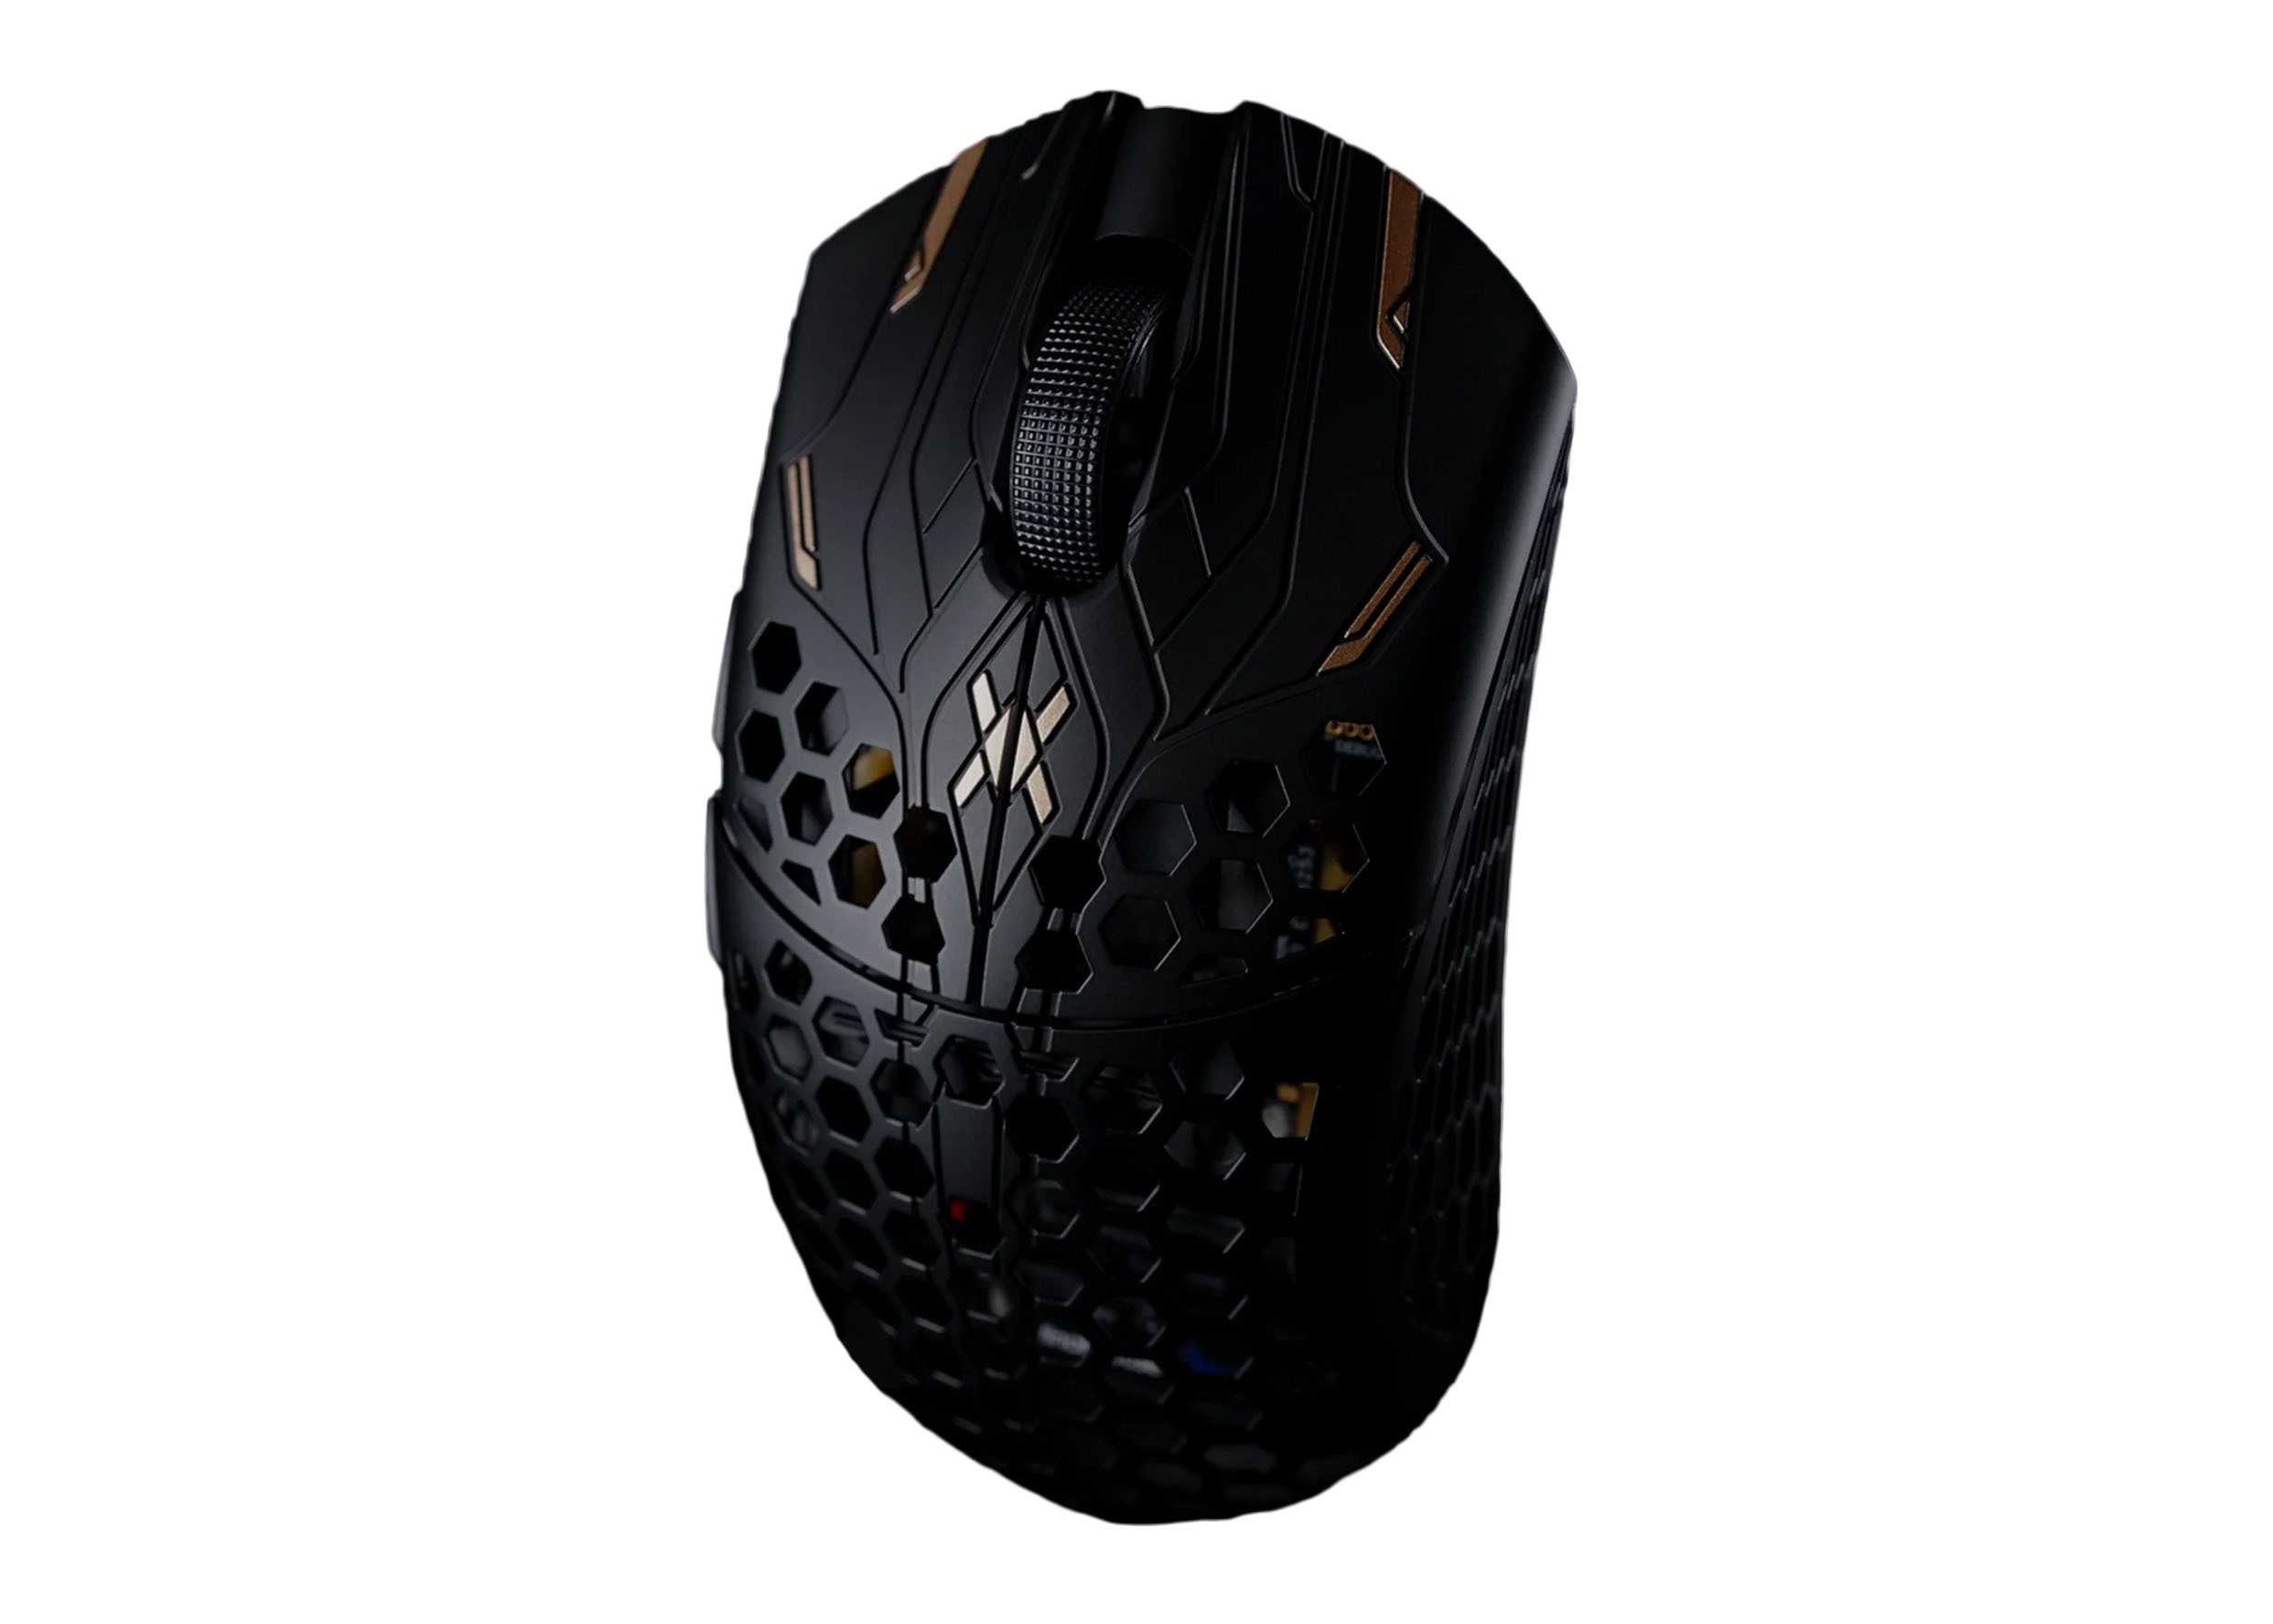 Finalmouse UltralightX Guardian Wireless Mouse 116 x 54mm Black/Gold